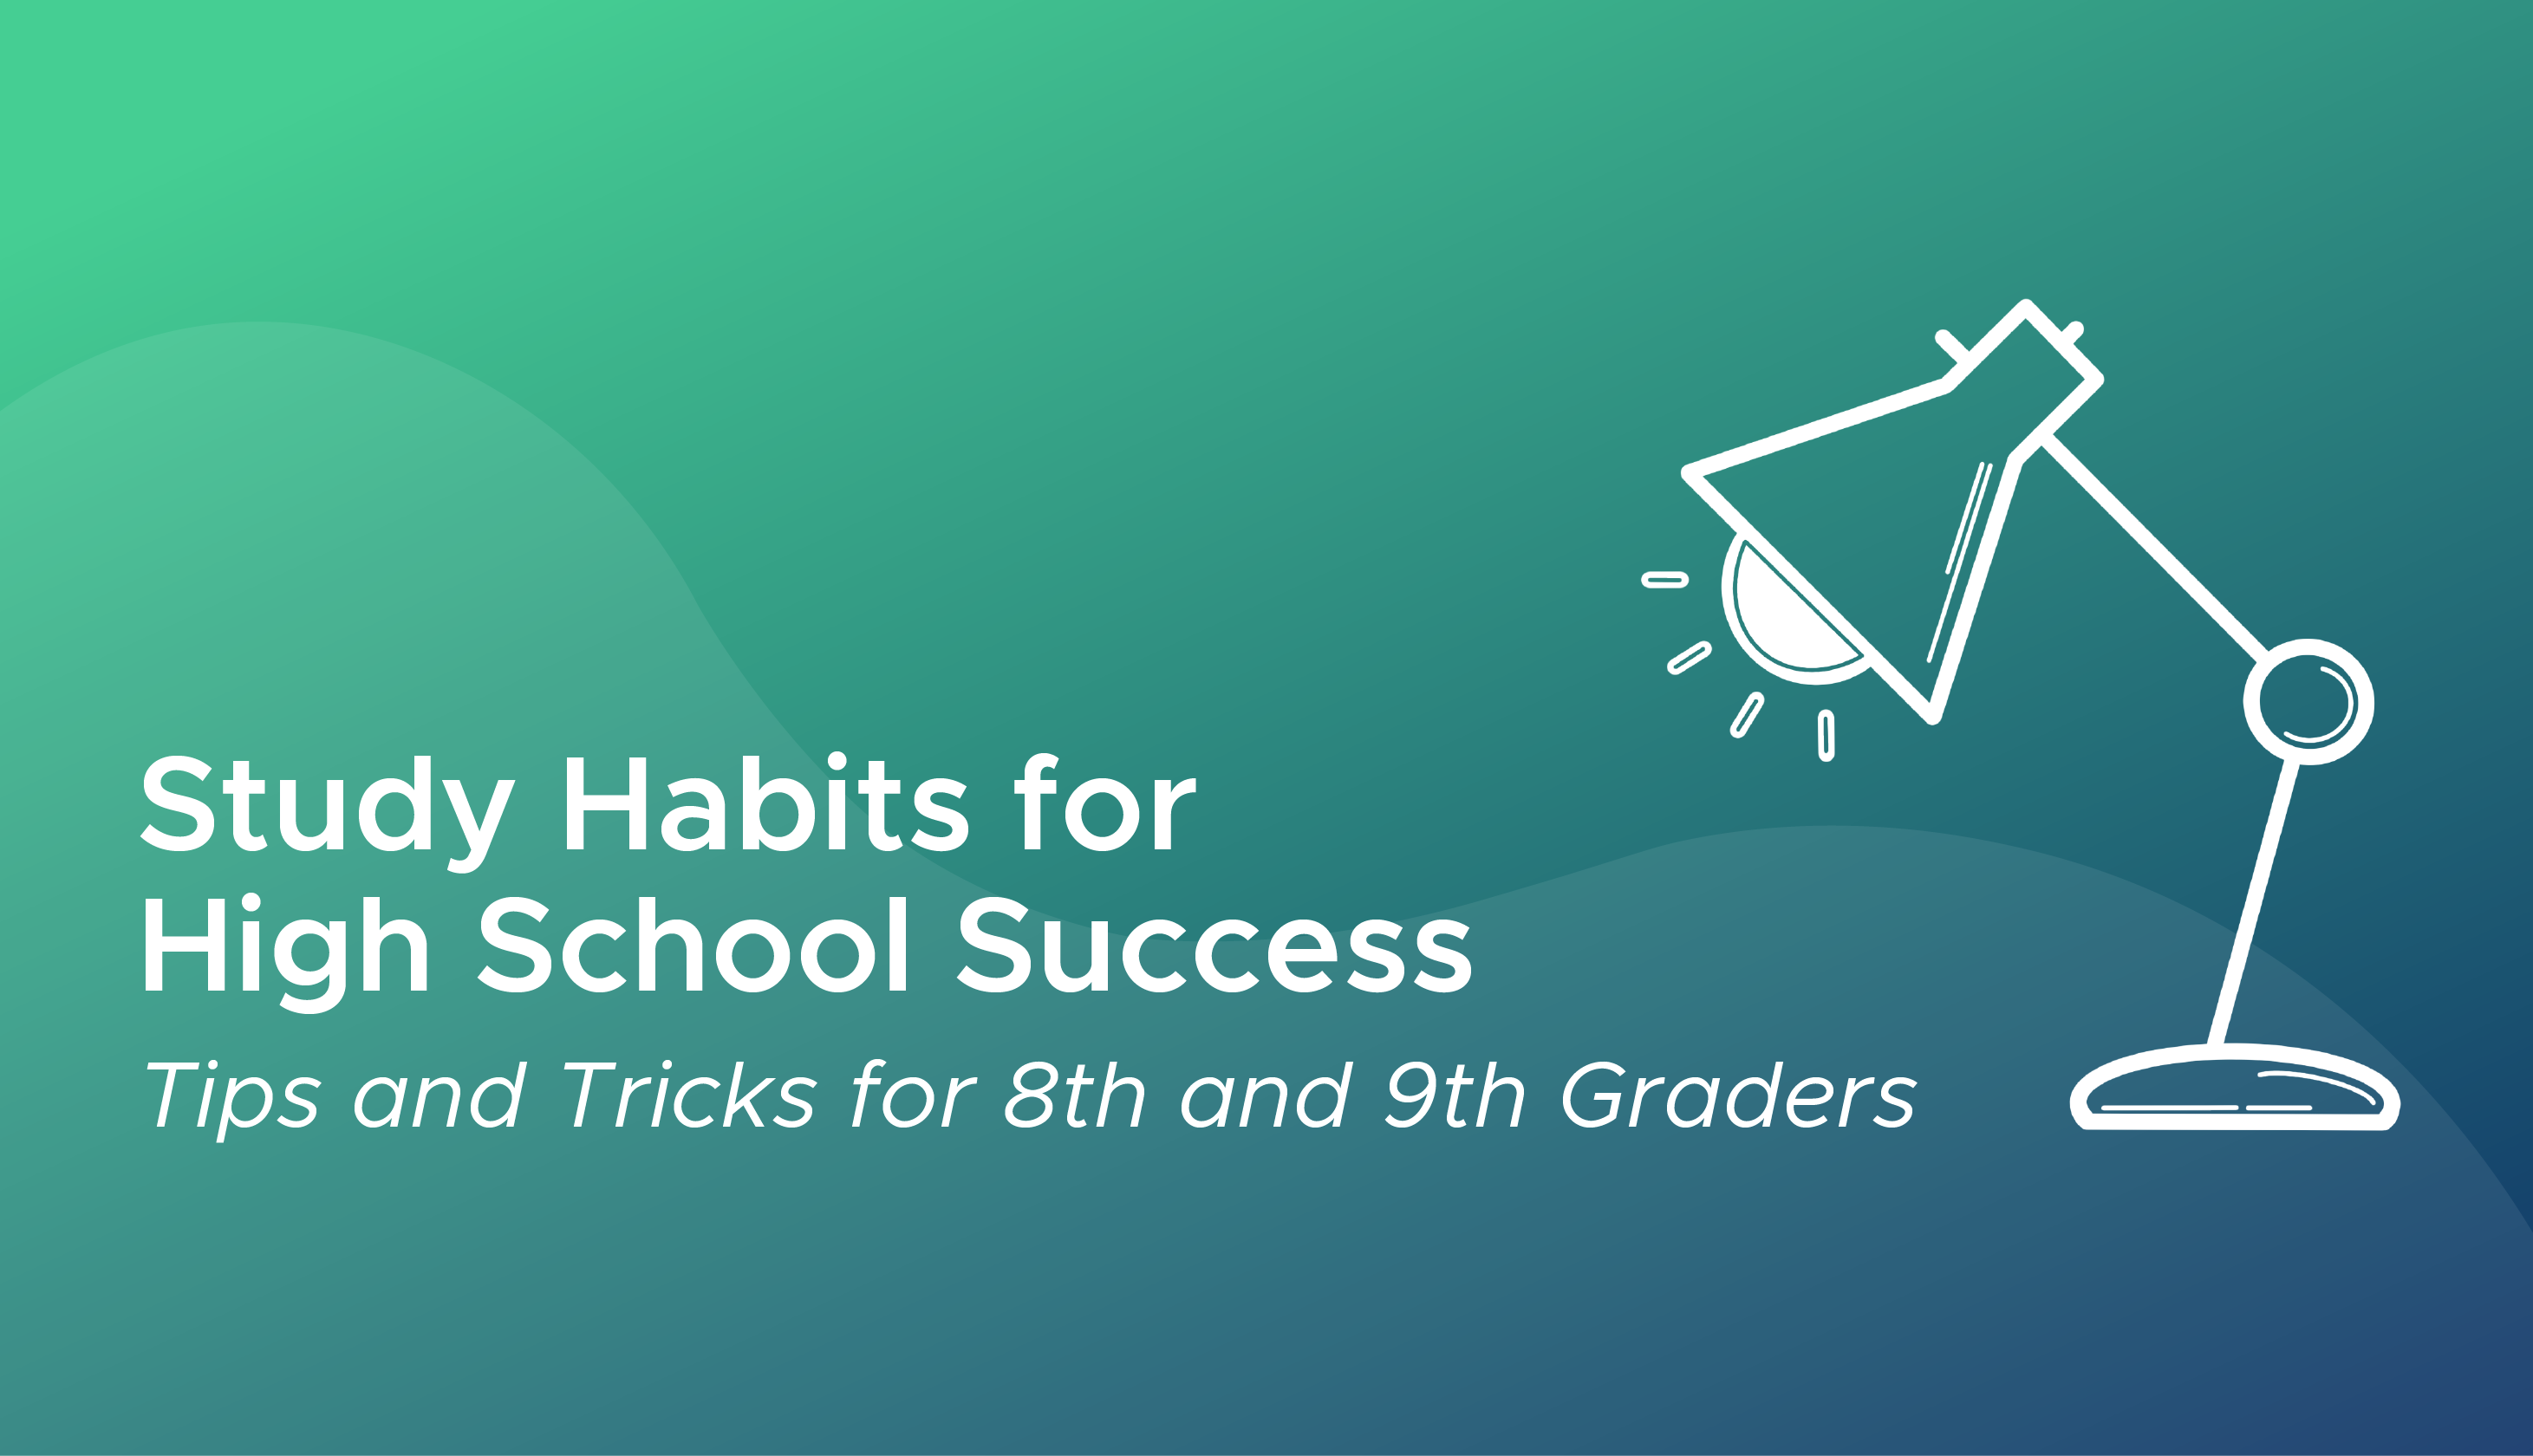 Study Habits for High School Success: Tips and Tricks for Underclassmen